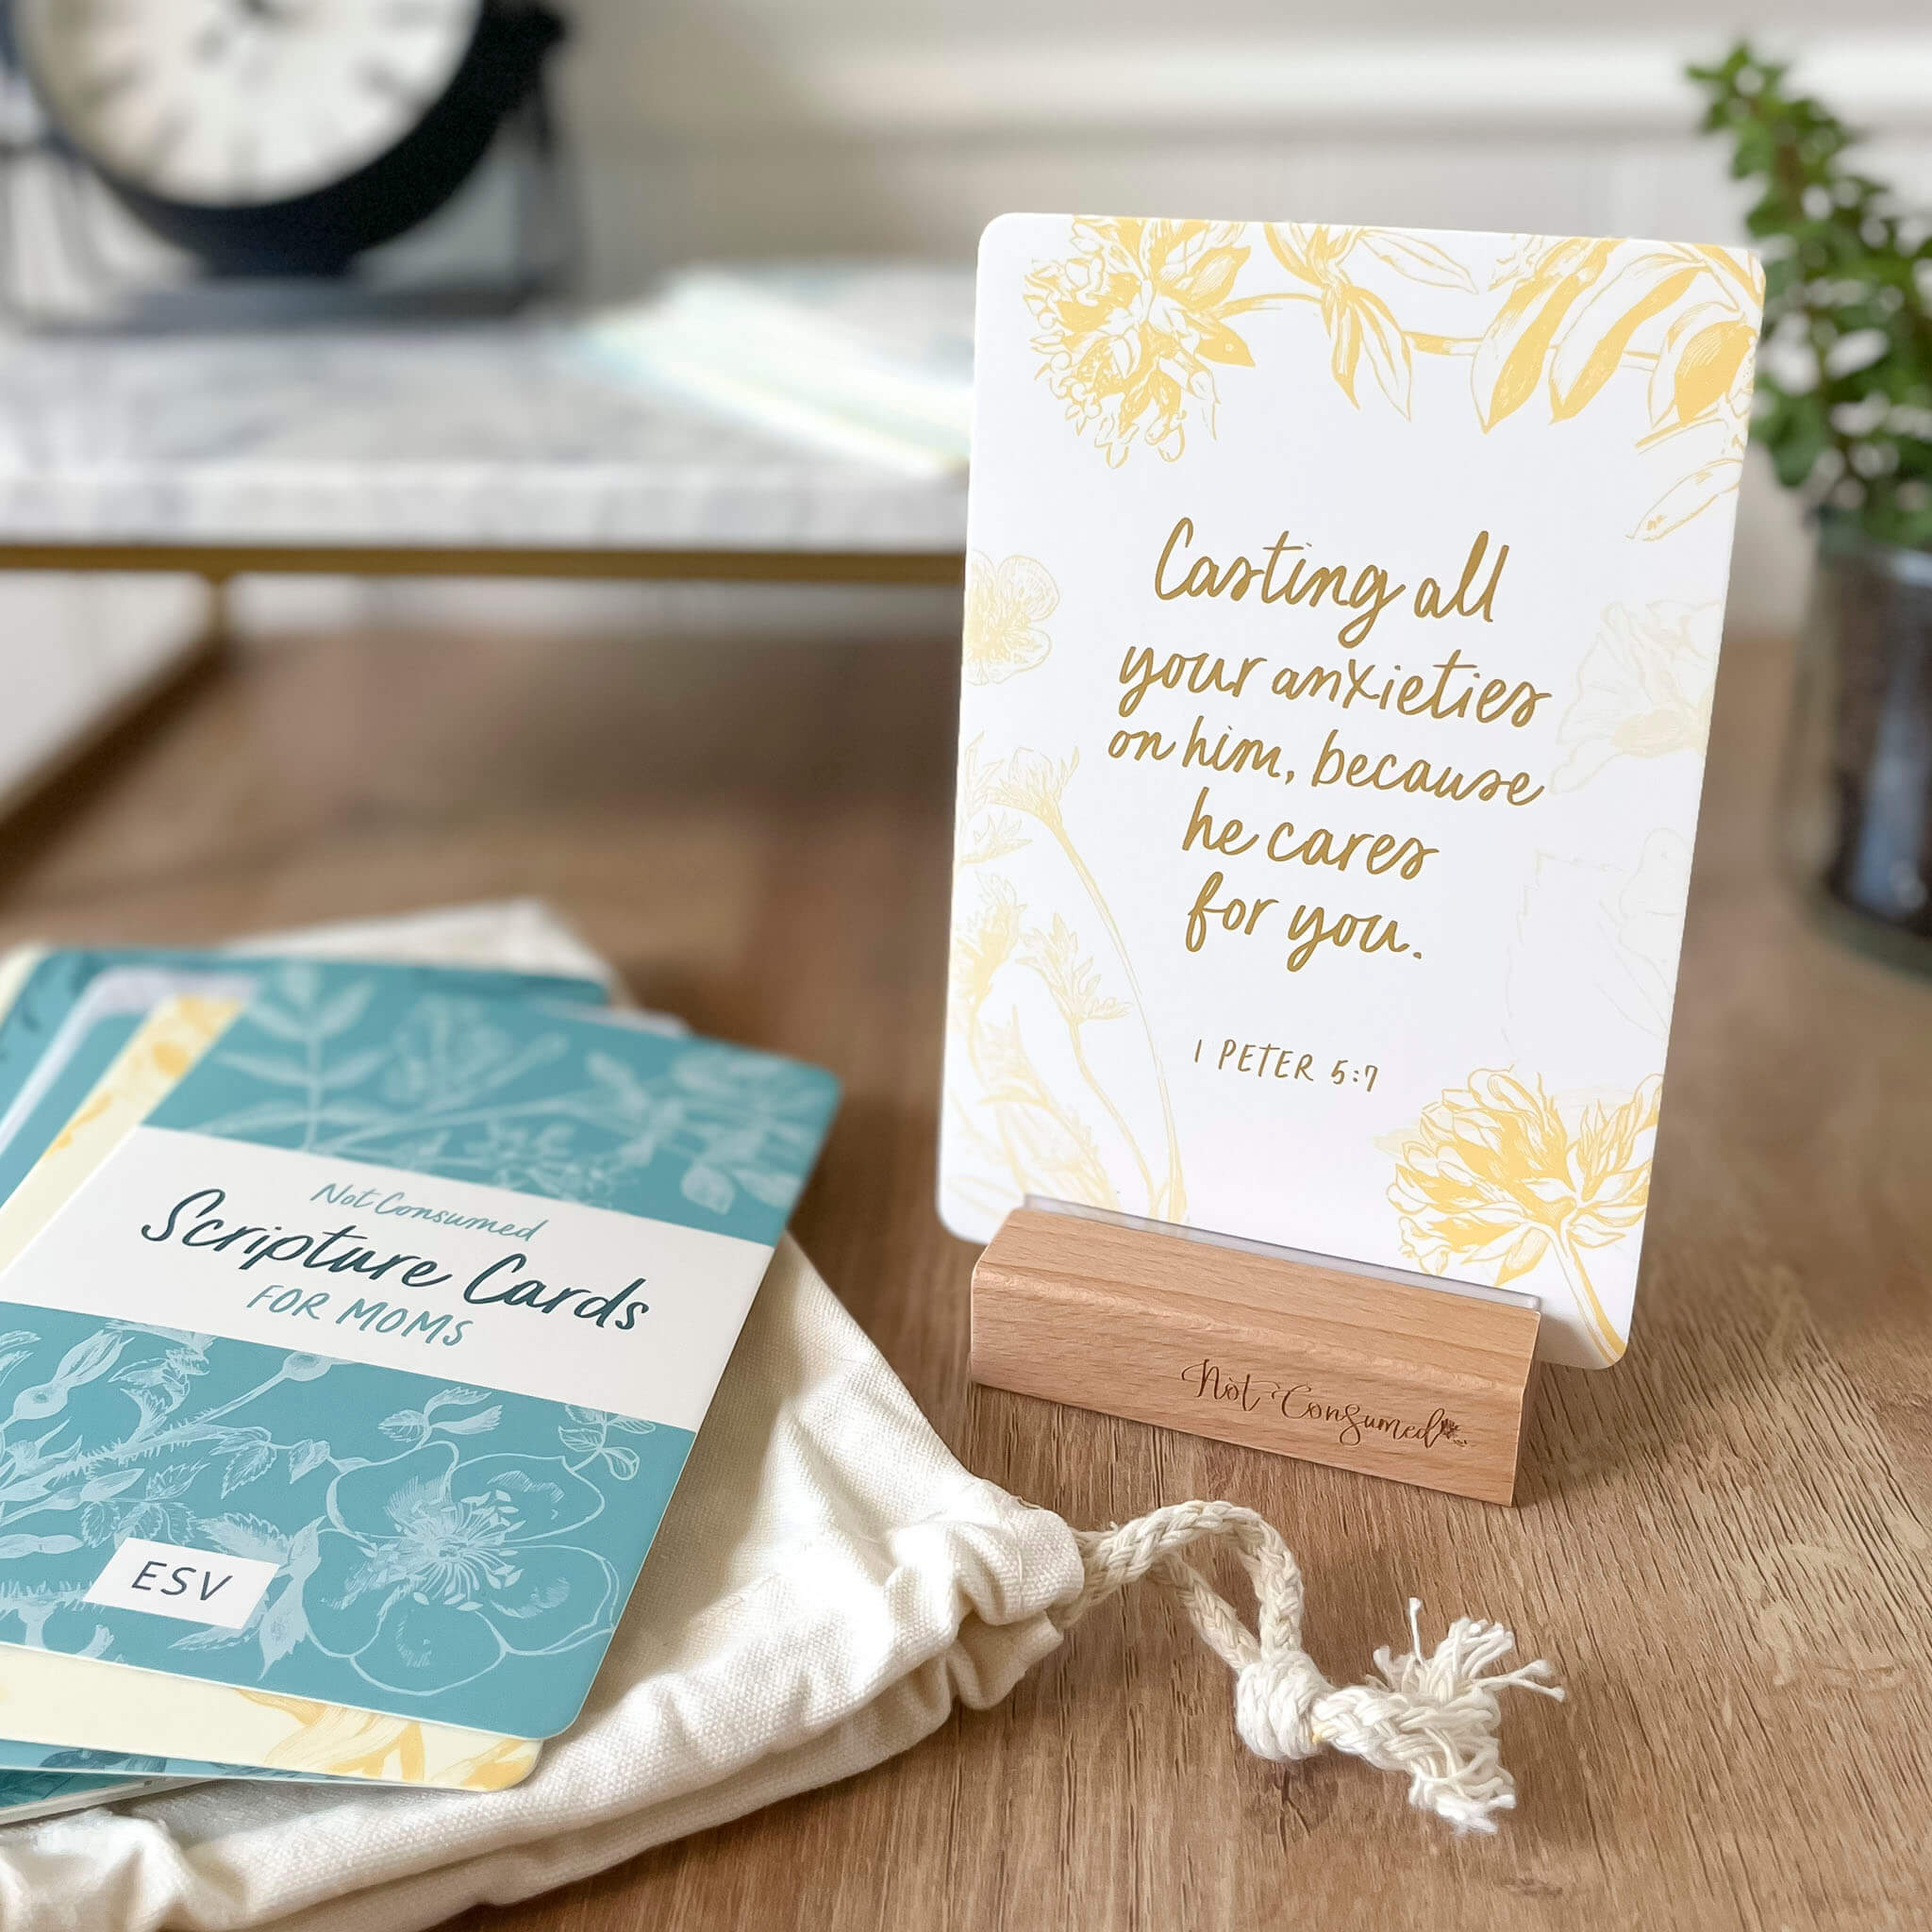 scripture cards for mom